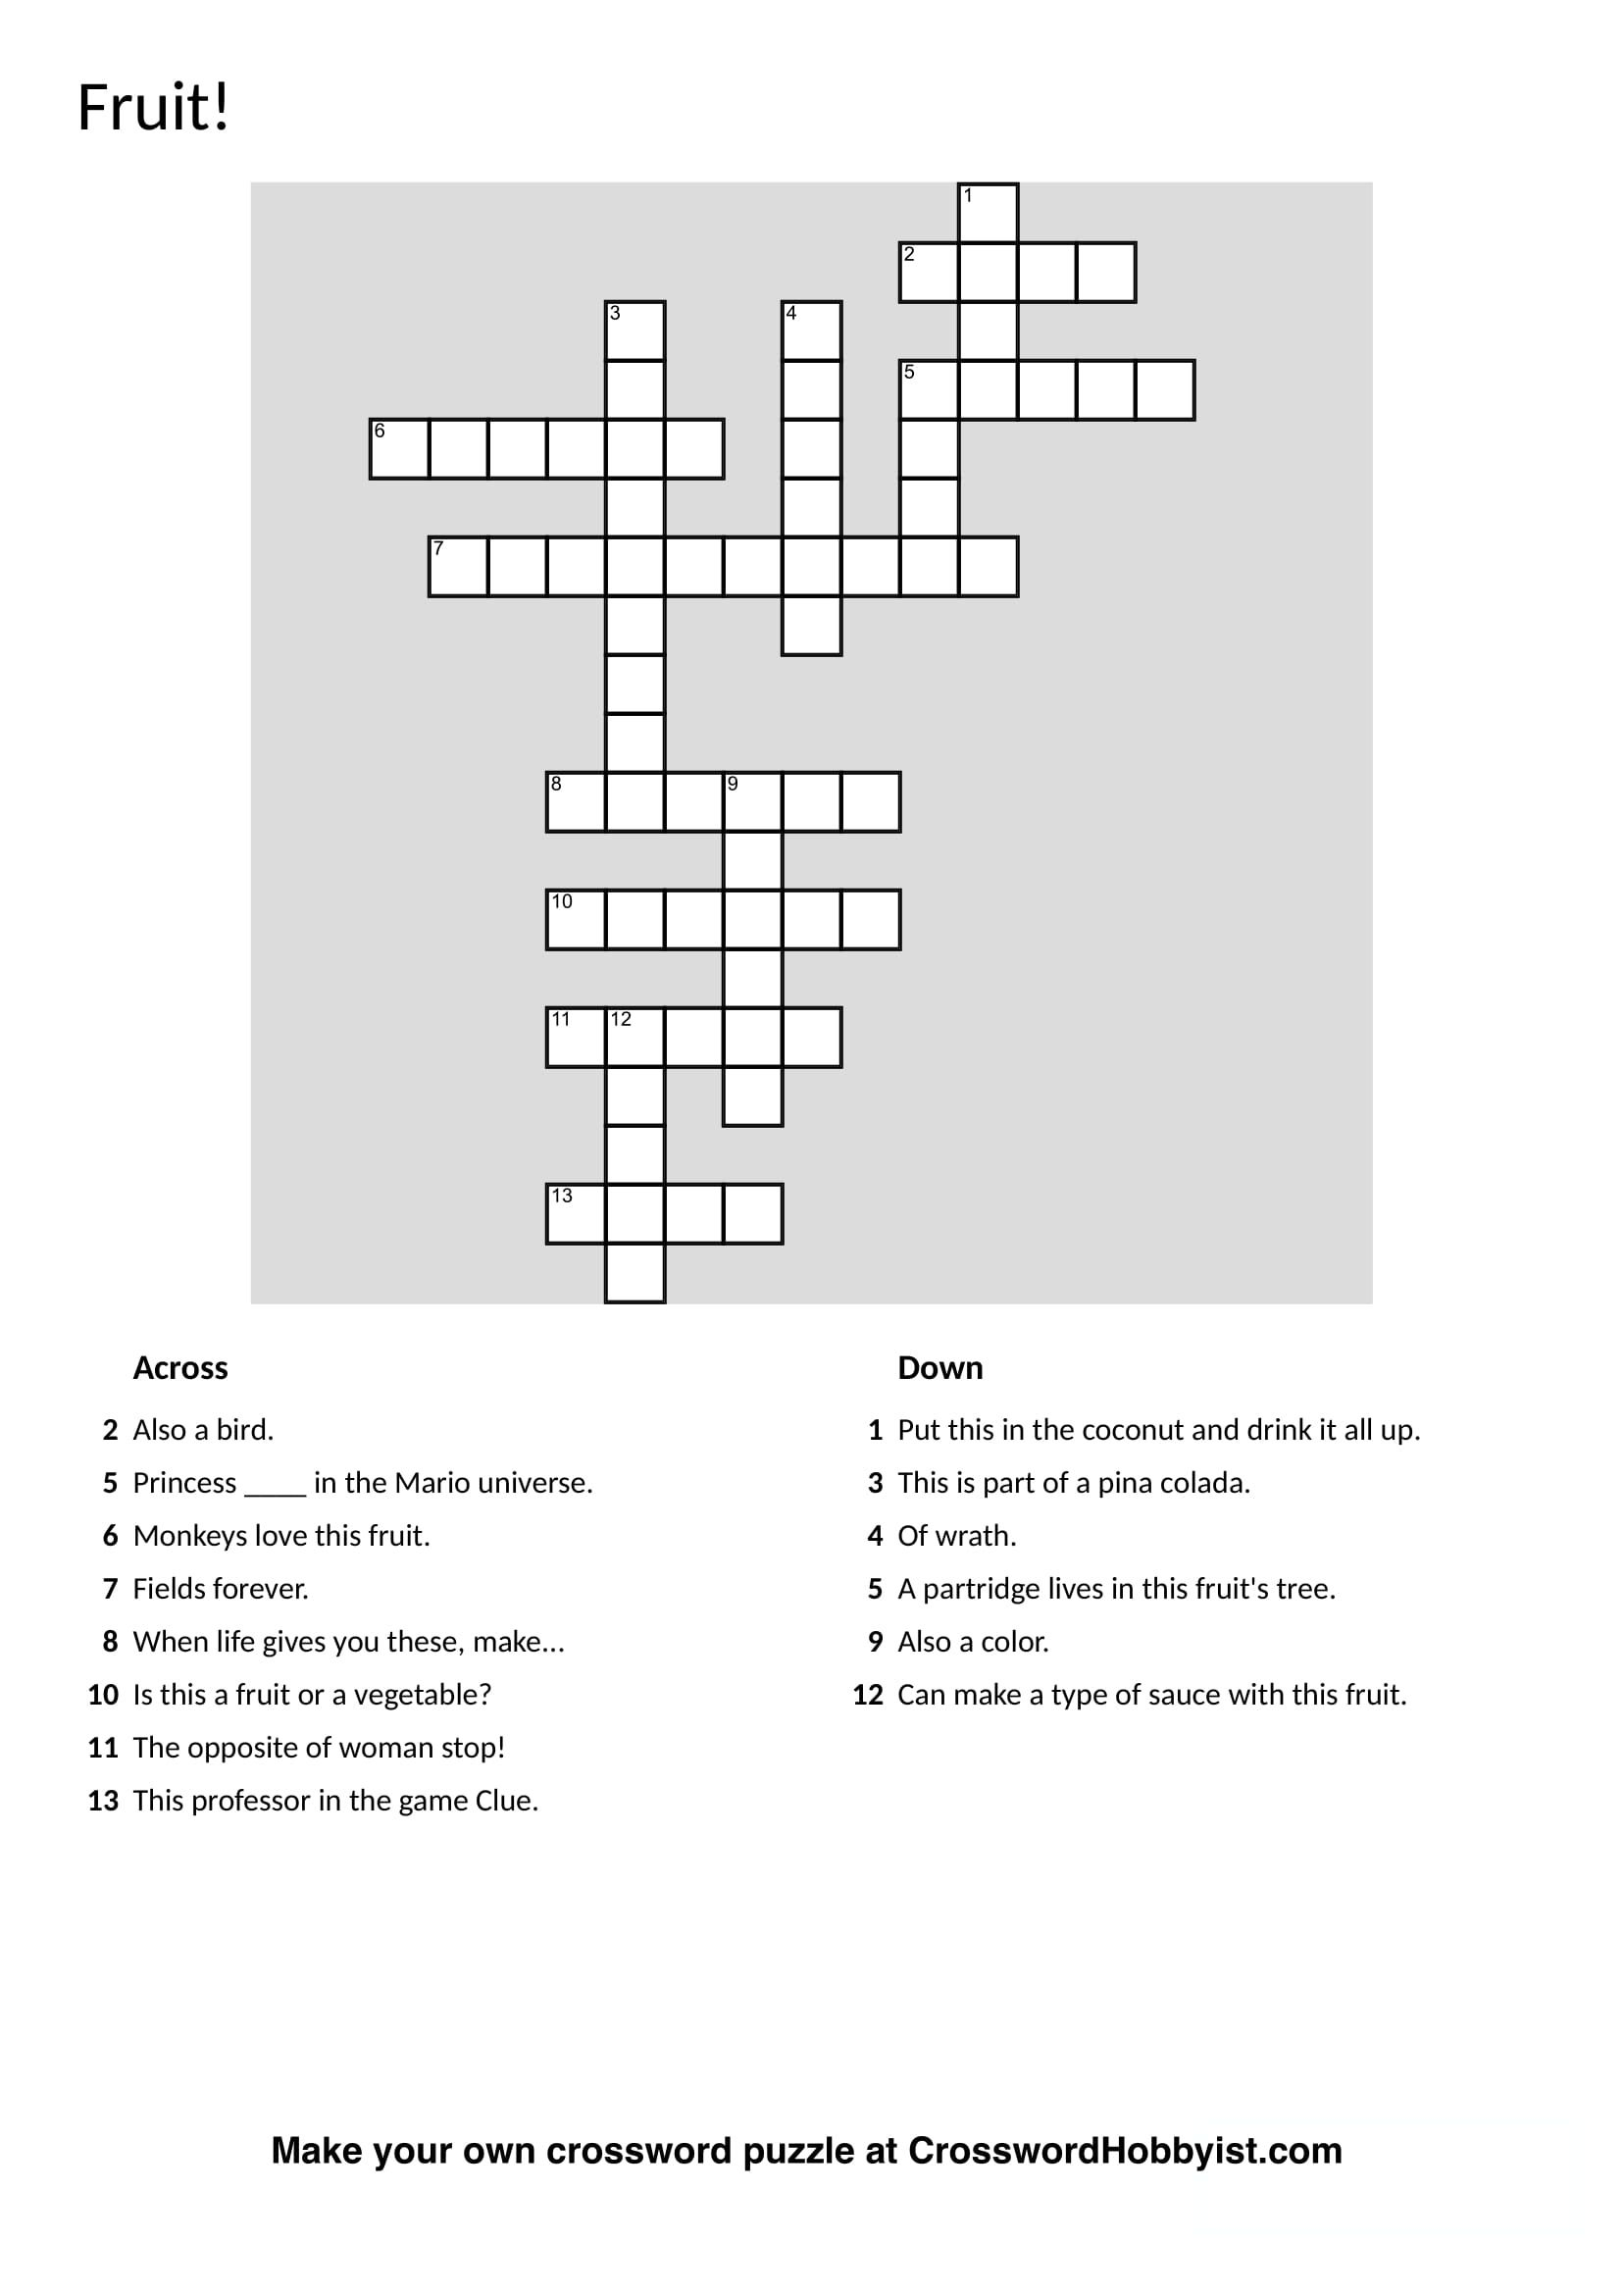 Make Your Own Fun Crossword Puzzles With Crosswordhobbyist - Make Your Own Crossword Puzzle Free Online Printable